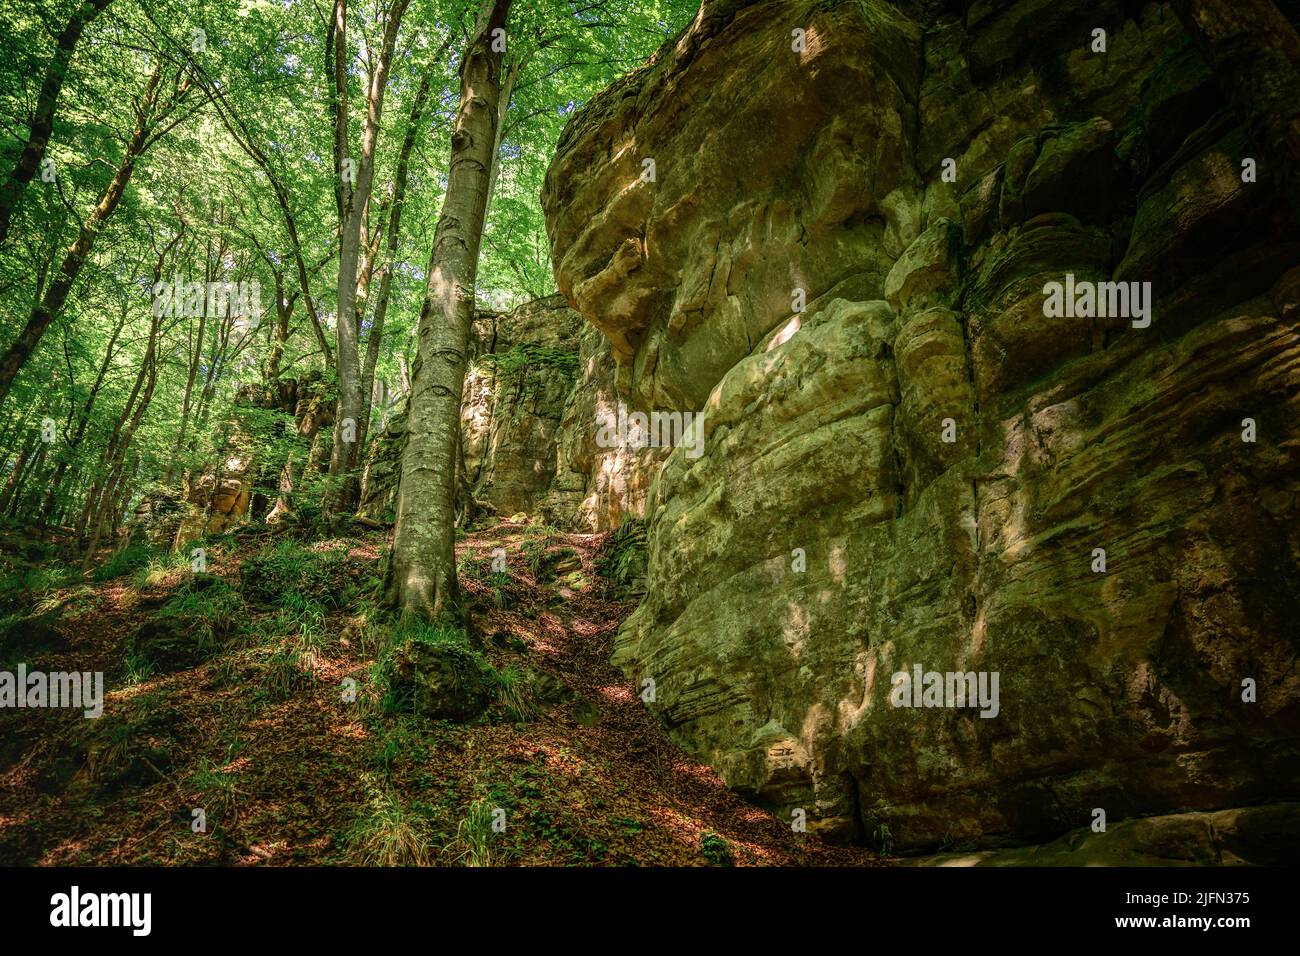 big rocks in the mullerthal in luxembourg Stock Photo